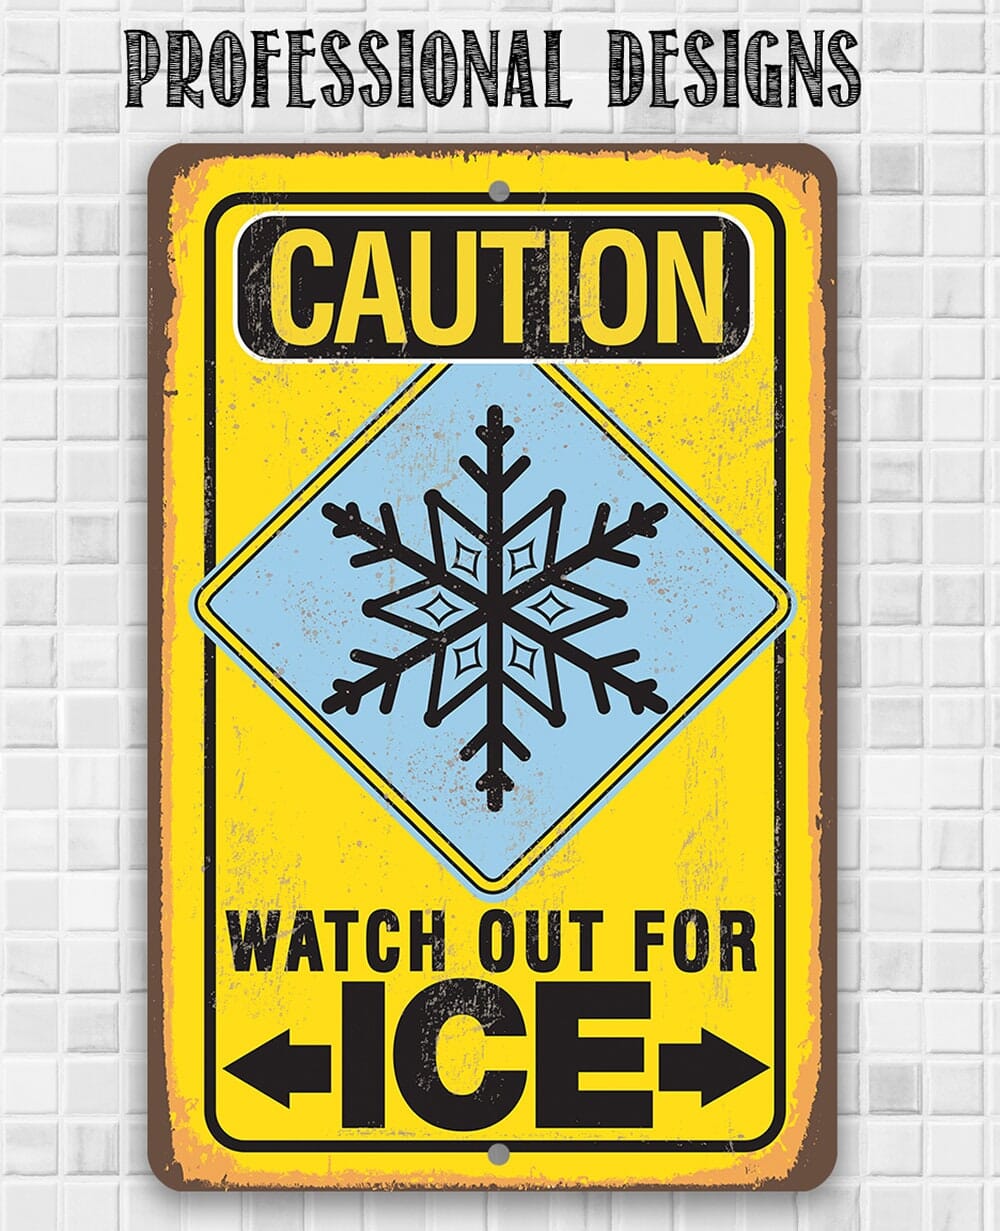 Tin - Metal Sign - Caution Watch Out For Ice-Durable Metal Sign - Use Indoor/Outdoor-8" x 12" or 12" x 18" Aluminum Tin Awesome Metal Poster Lone Star Art 